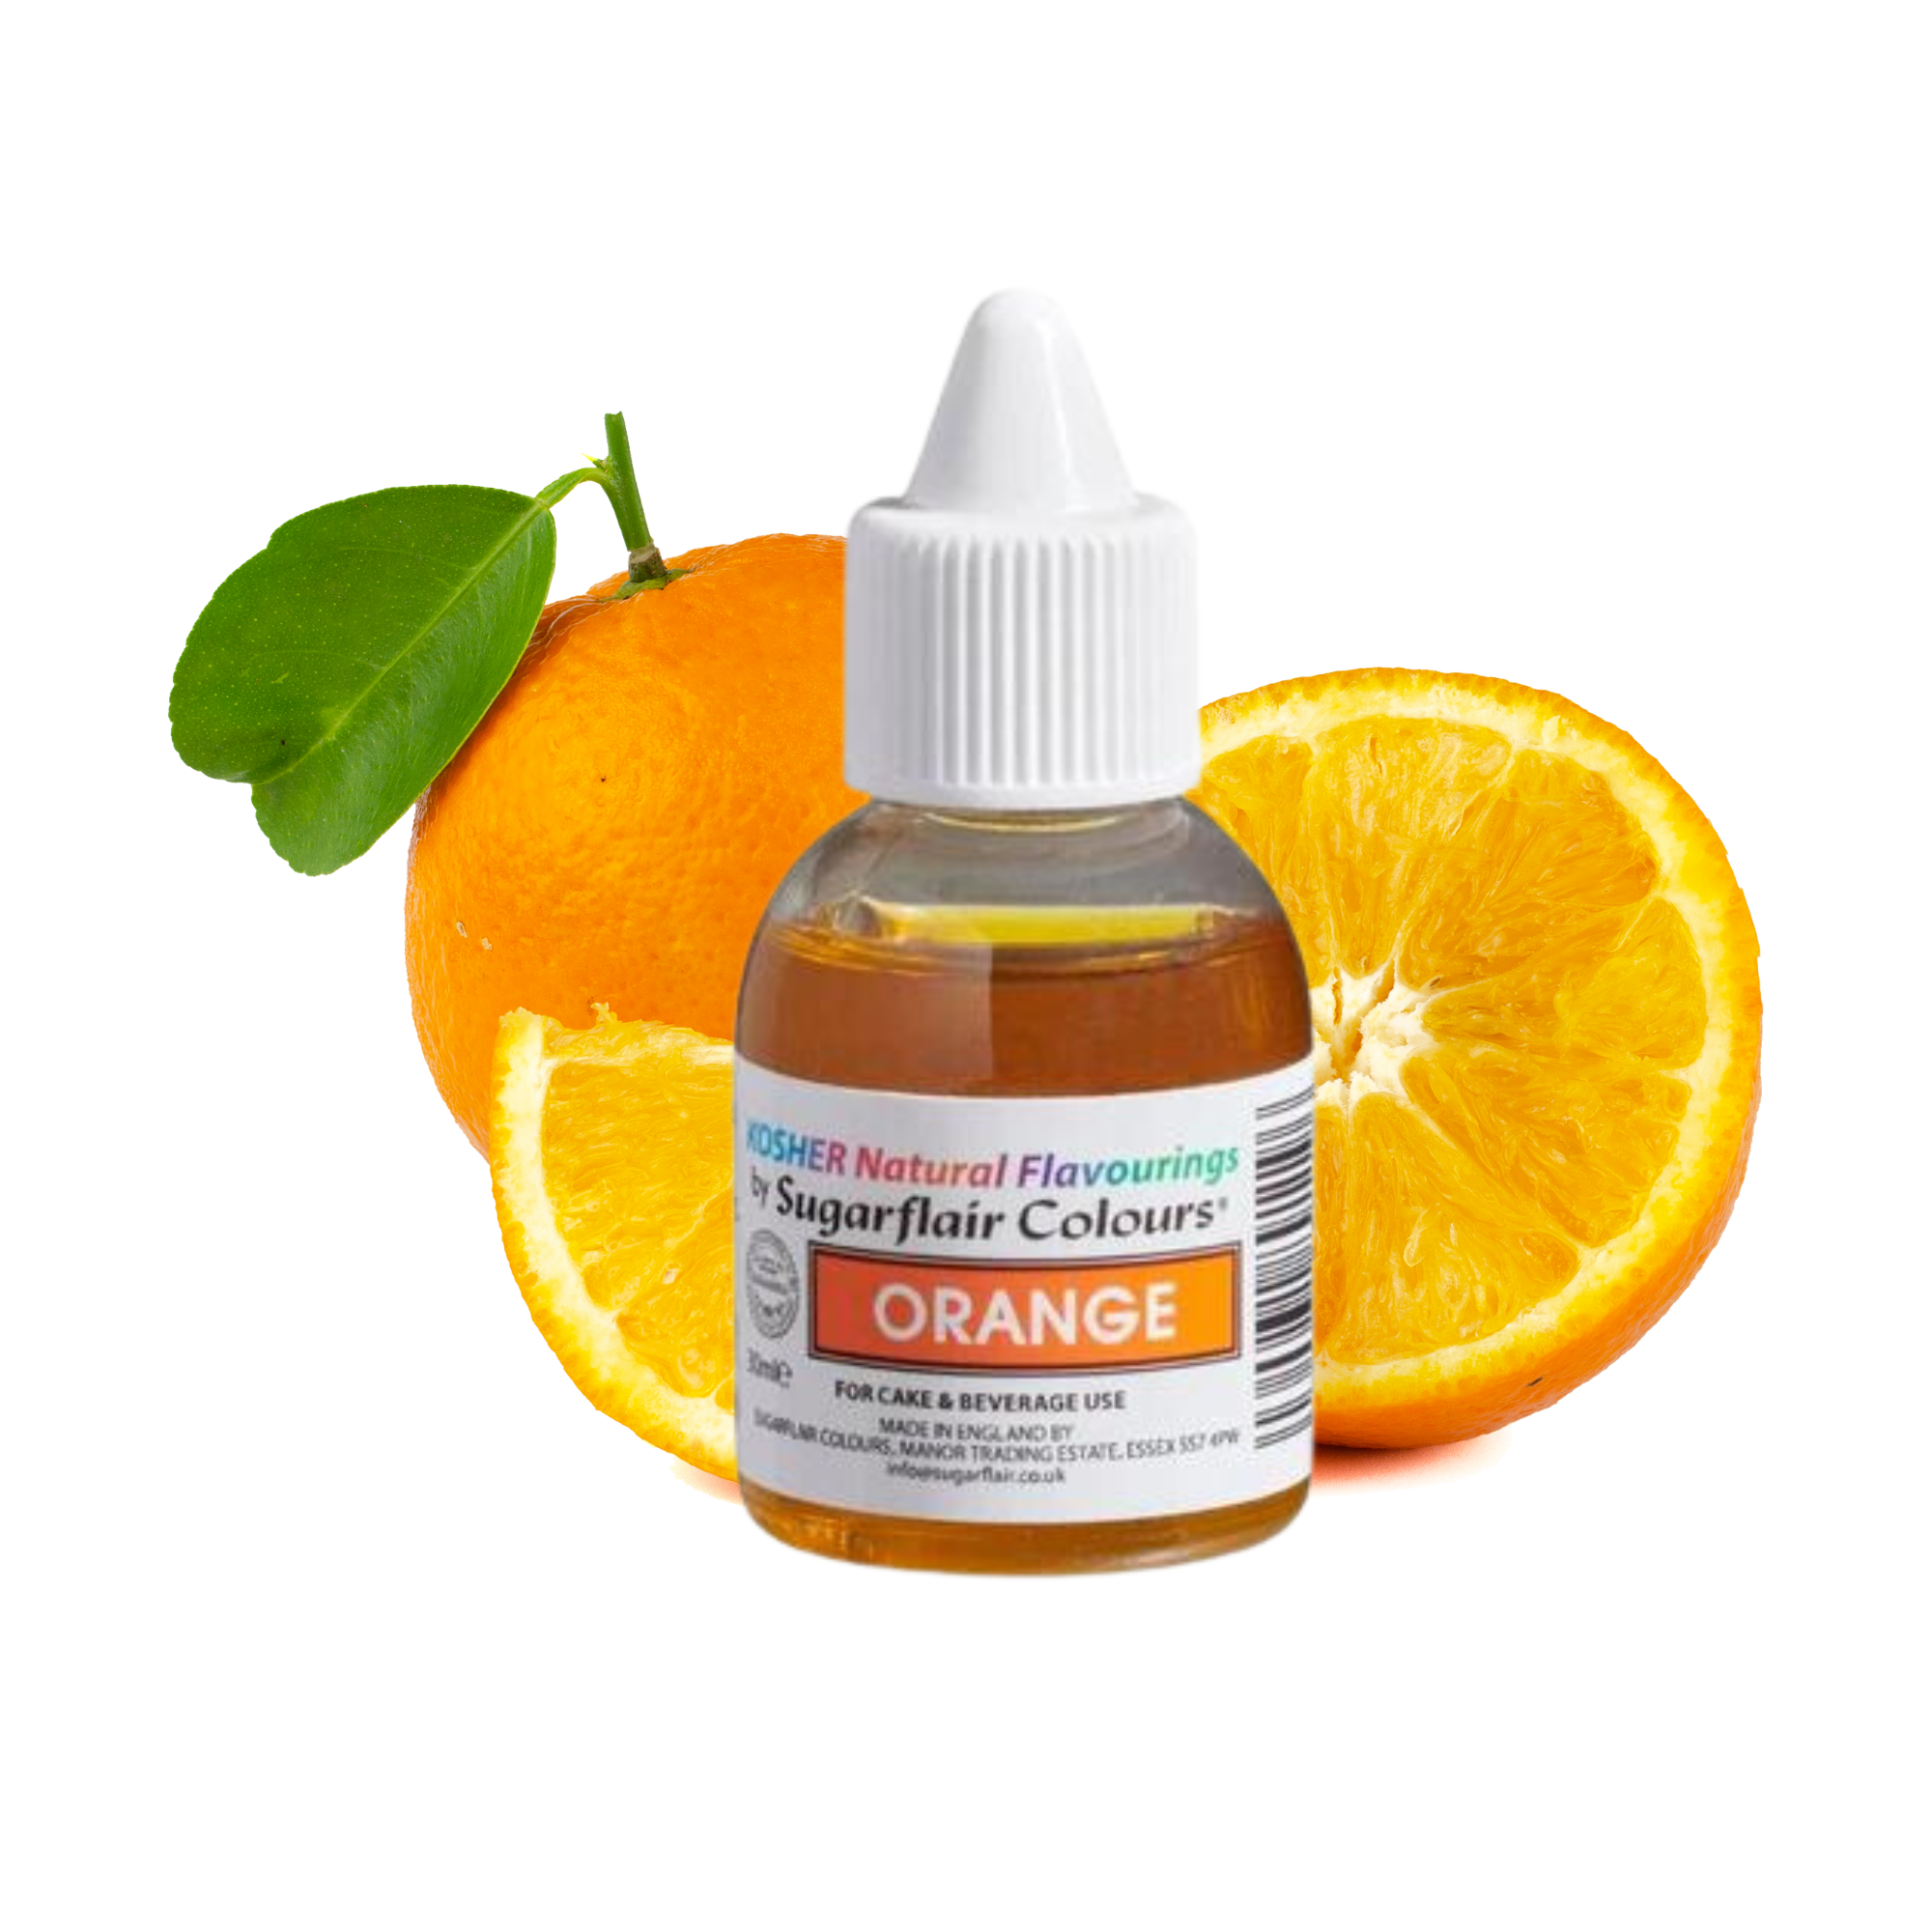 Sugarflair Orange - Kosher Concentrated Natural Flavour / Food Flavouring 30ml